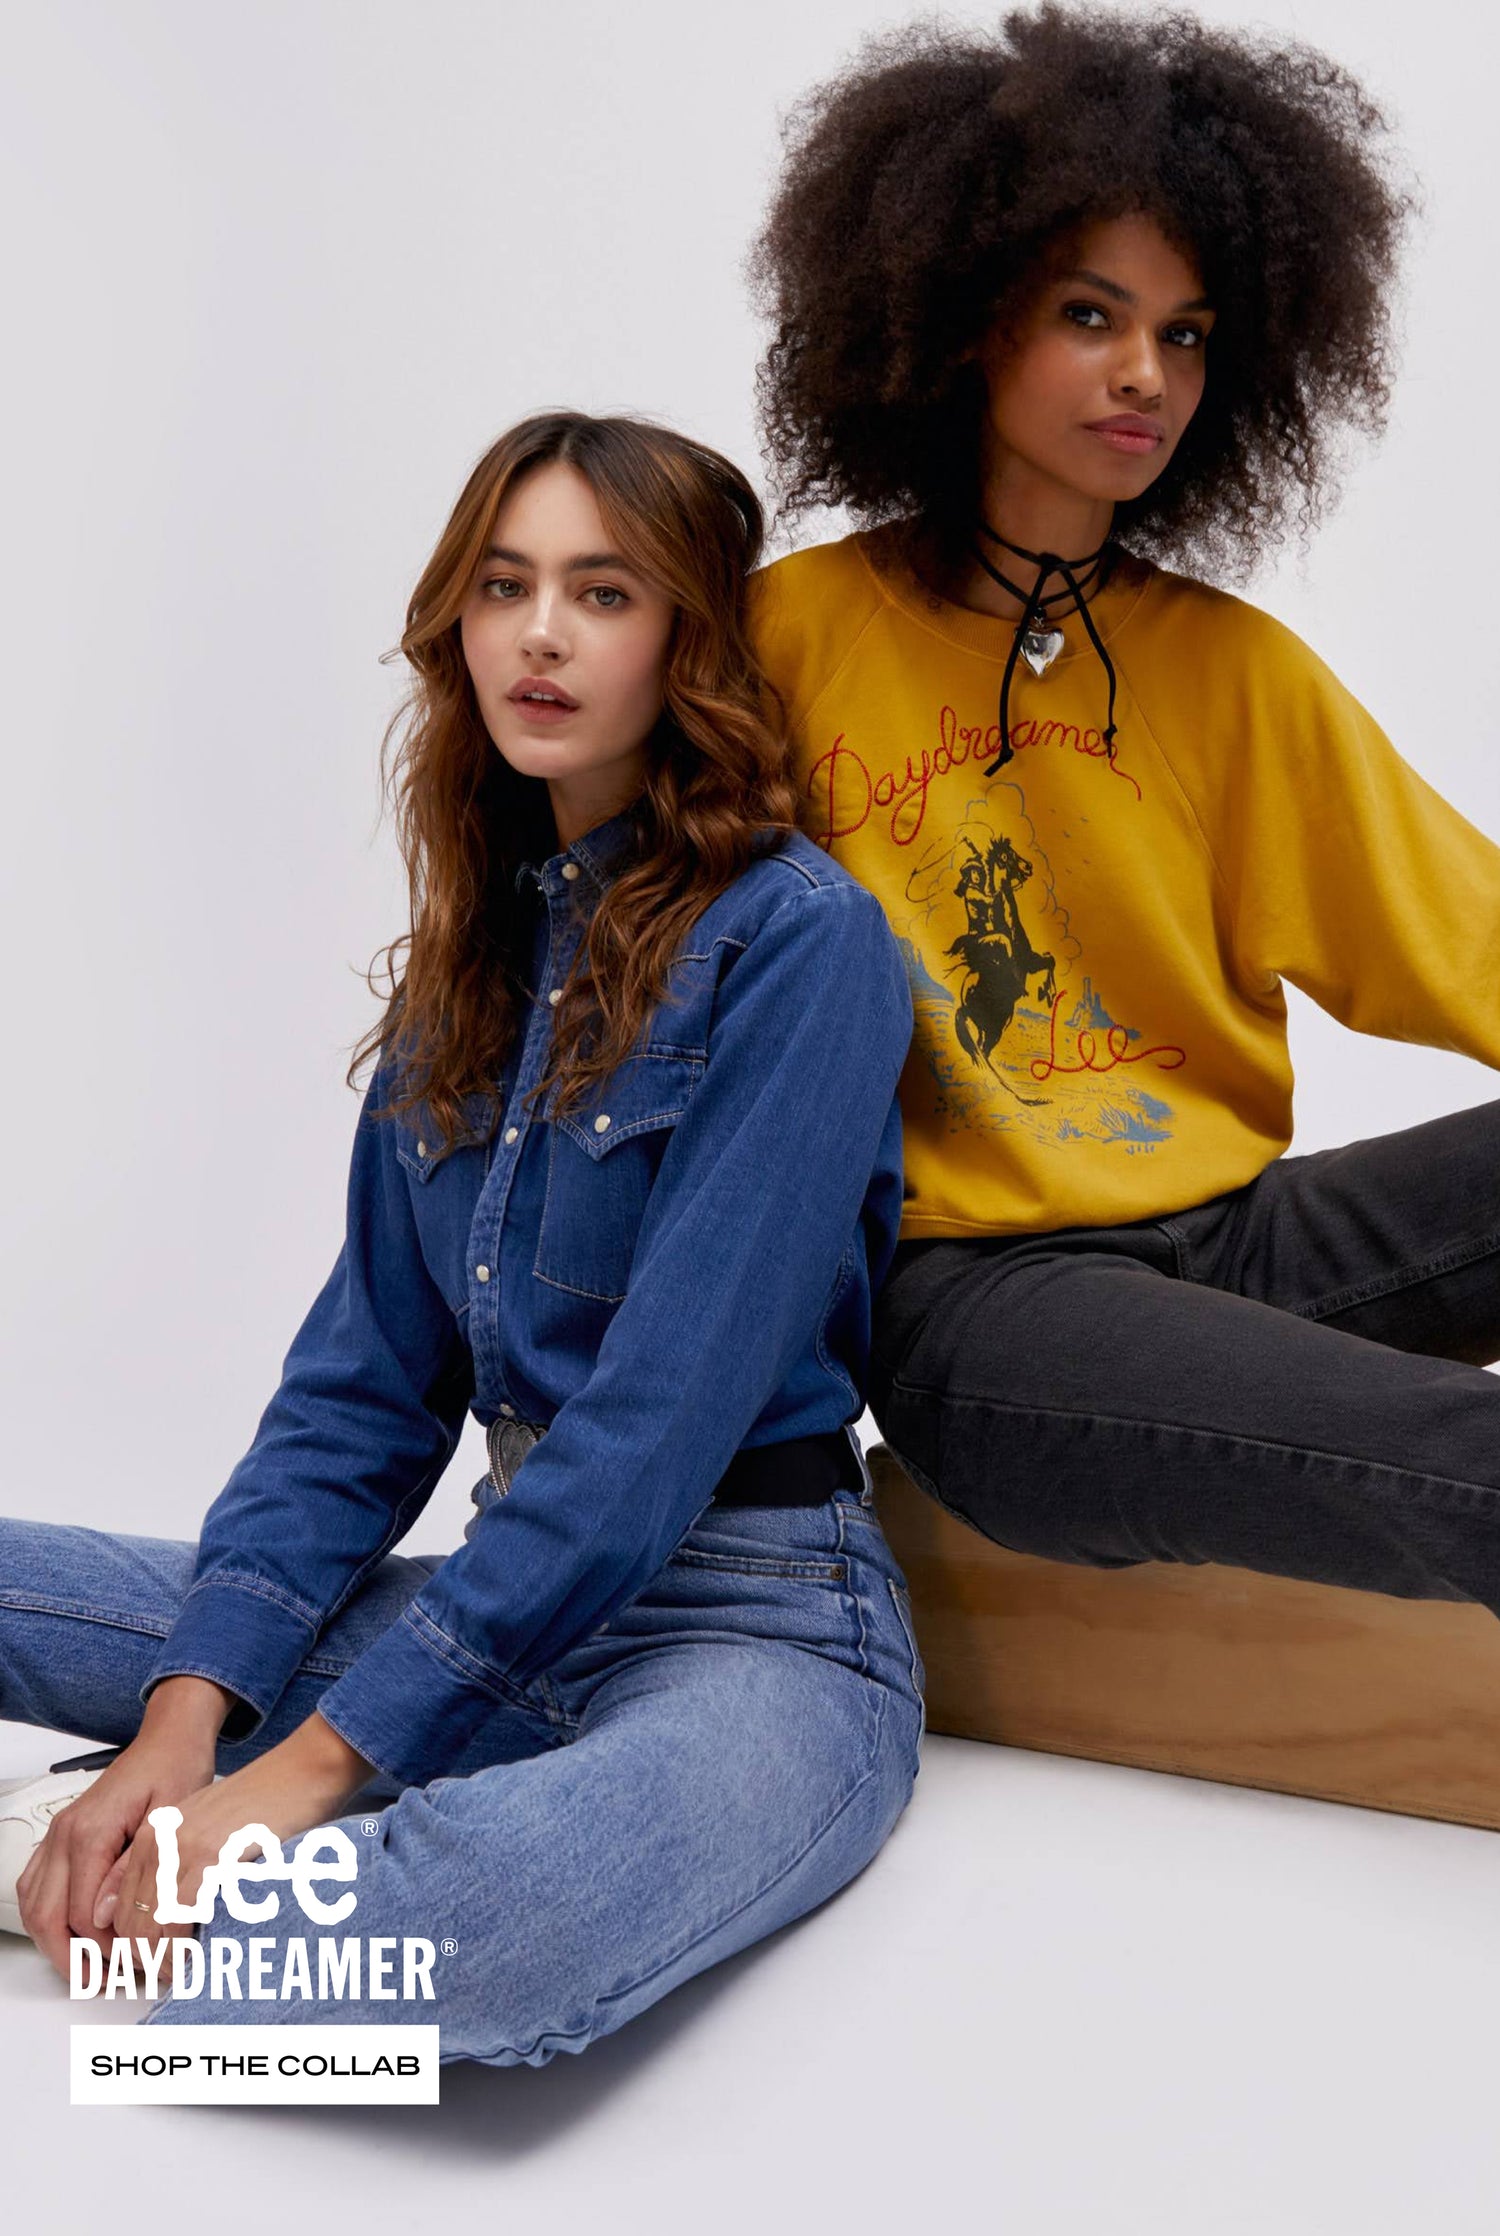 Brunette model wearing denim button up shirt and jeans, curly hair model wearing mustard crewneck, both sitting